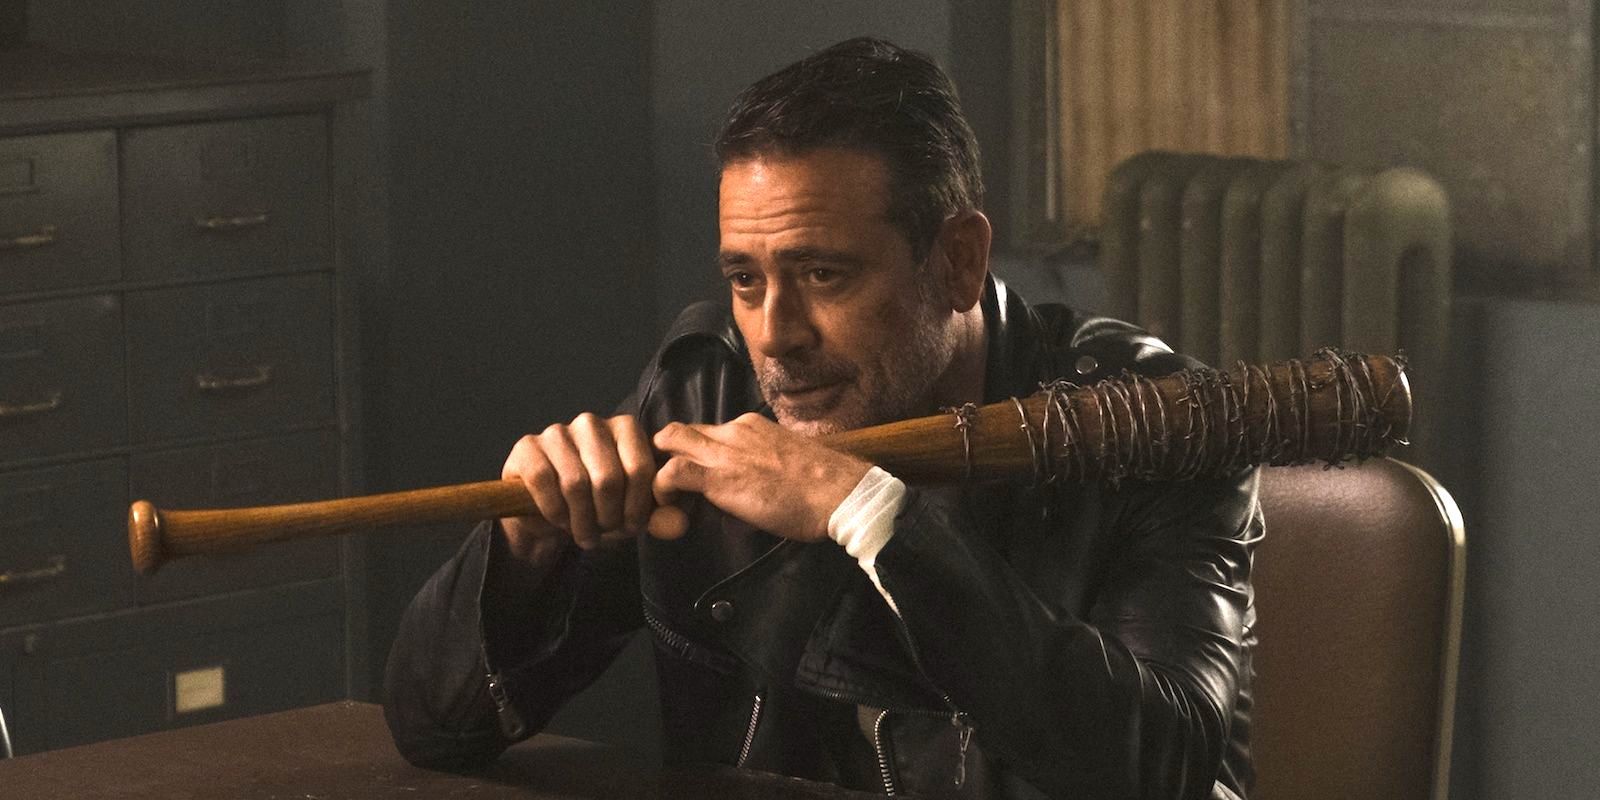 Negan sitting holding Lucille in The Walking Dead